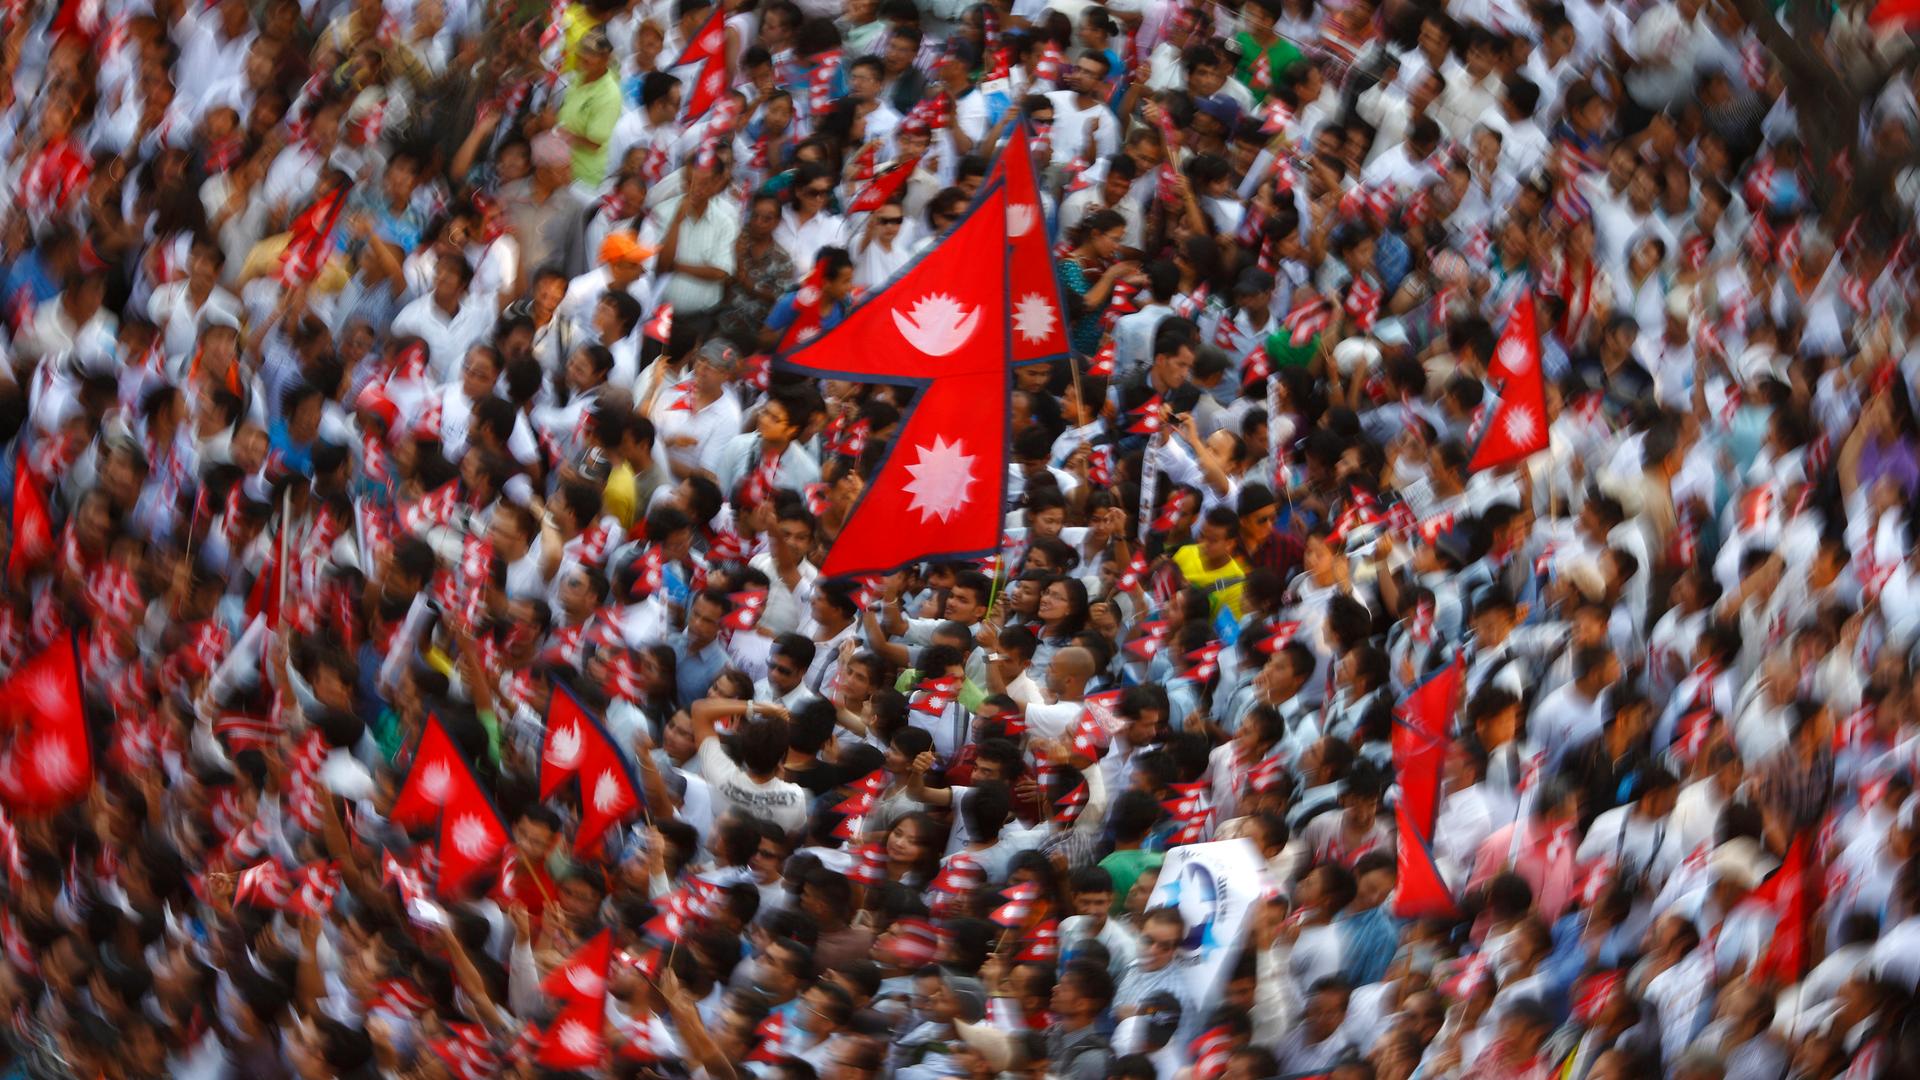 Demonstrators carrying the national flag of Nepal.